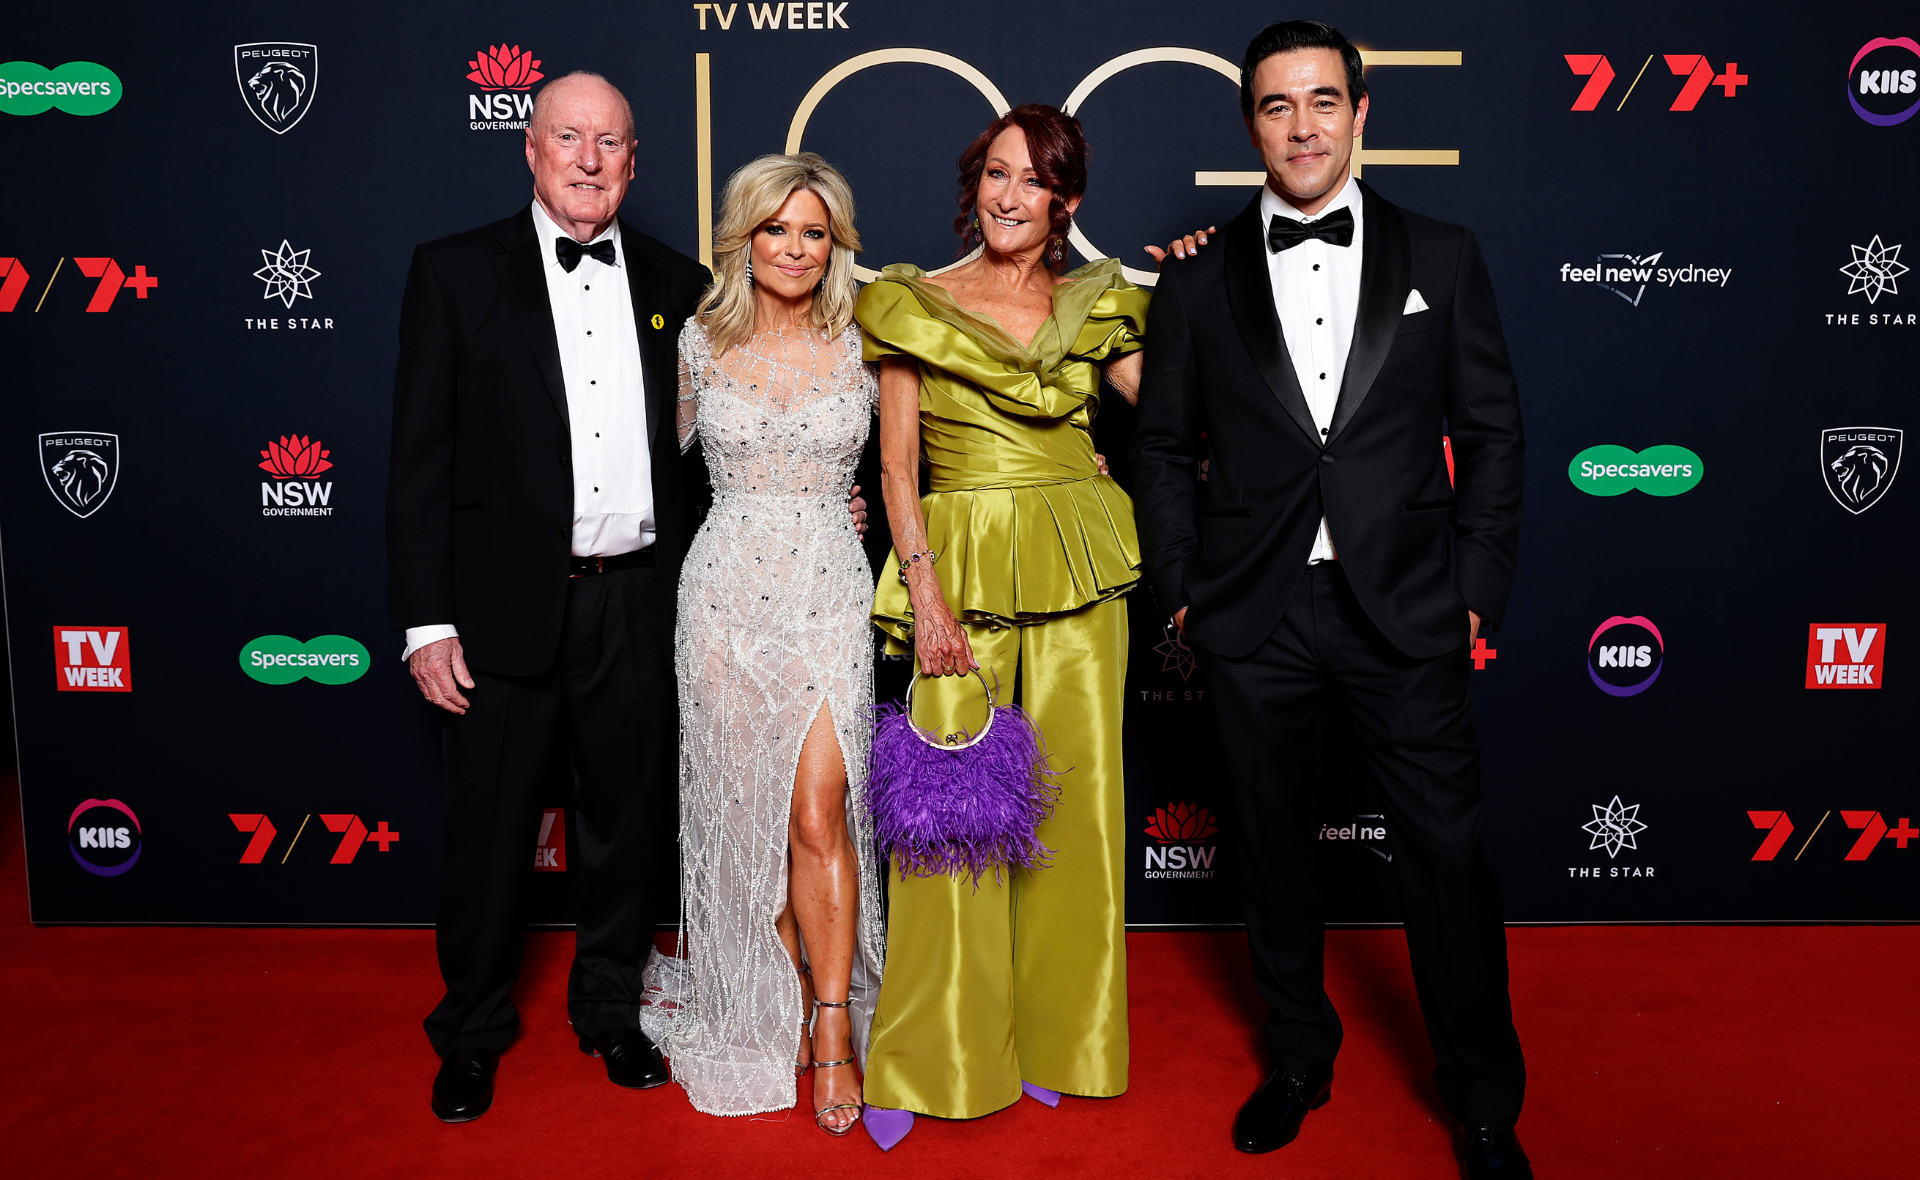 Home and Away cast bring Summer Bay style to the 2023 TV WEEK Logie Awards red carpet